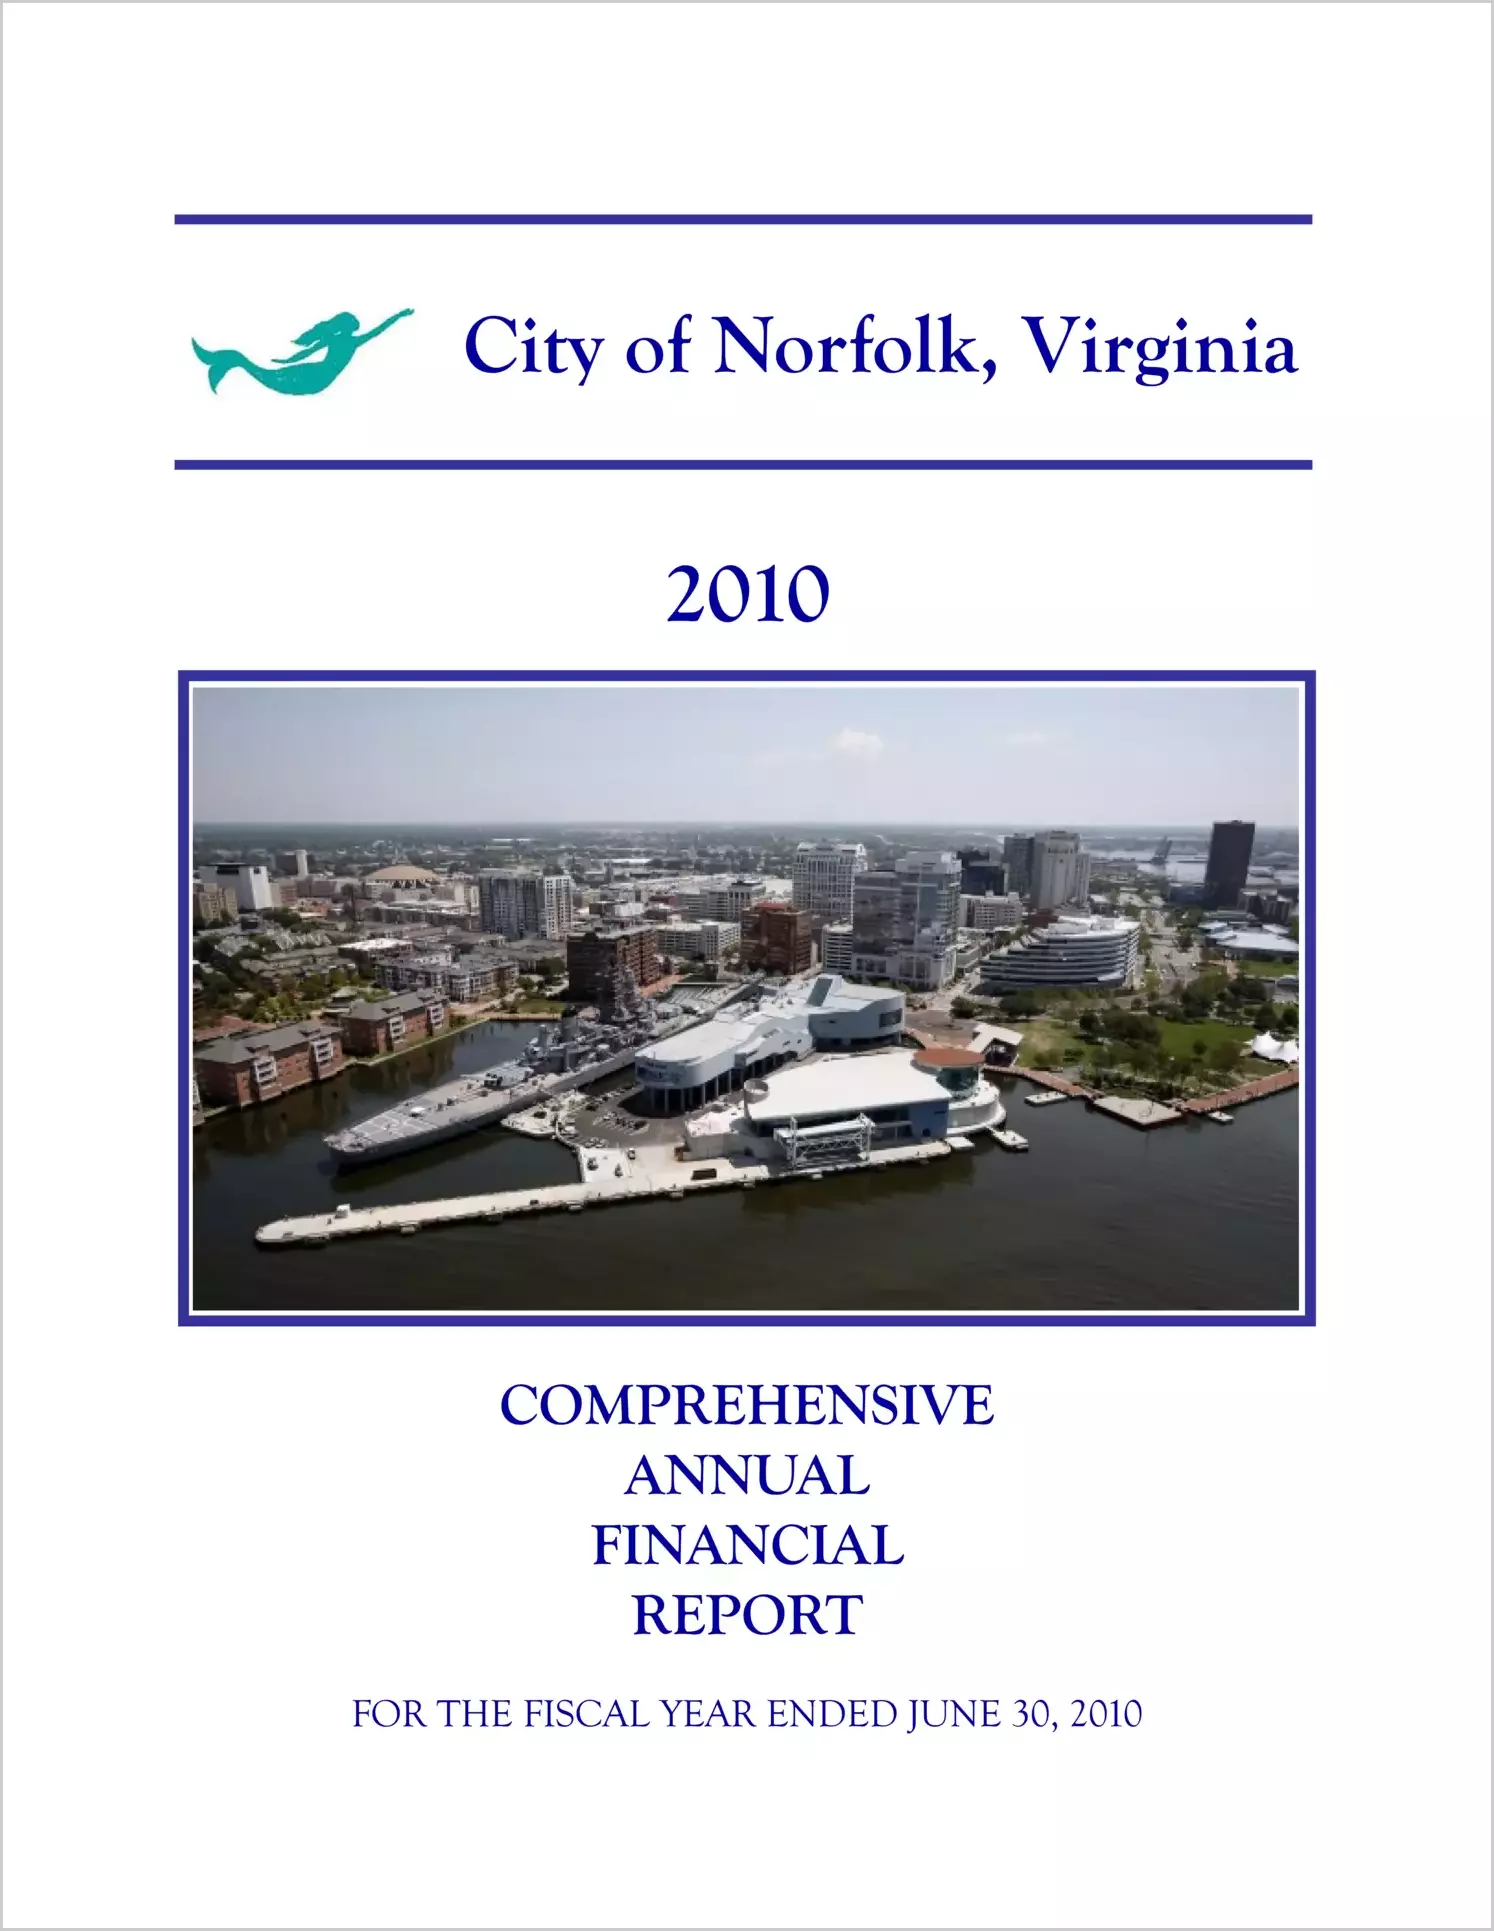 2010 Annual Financial Report for City of Norfolk